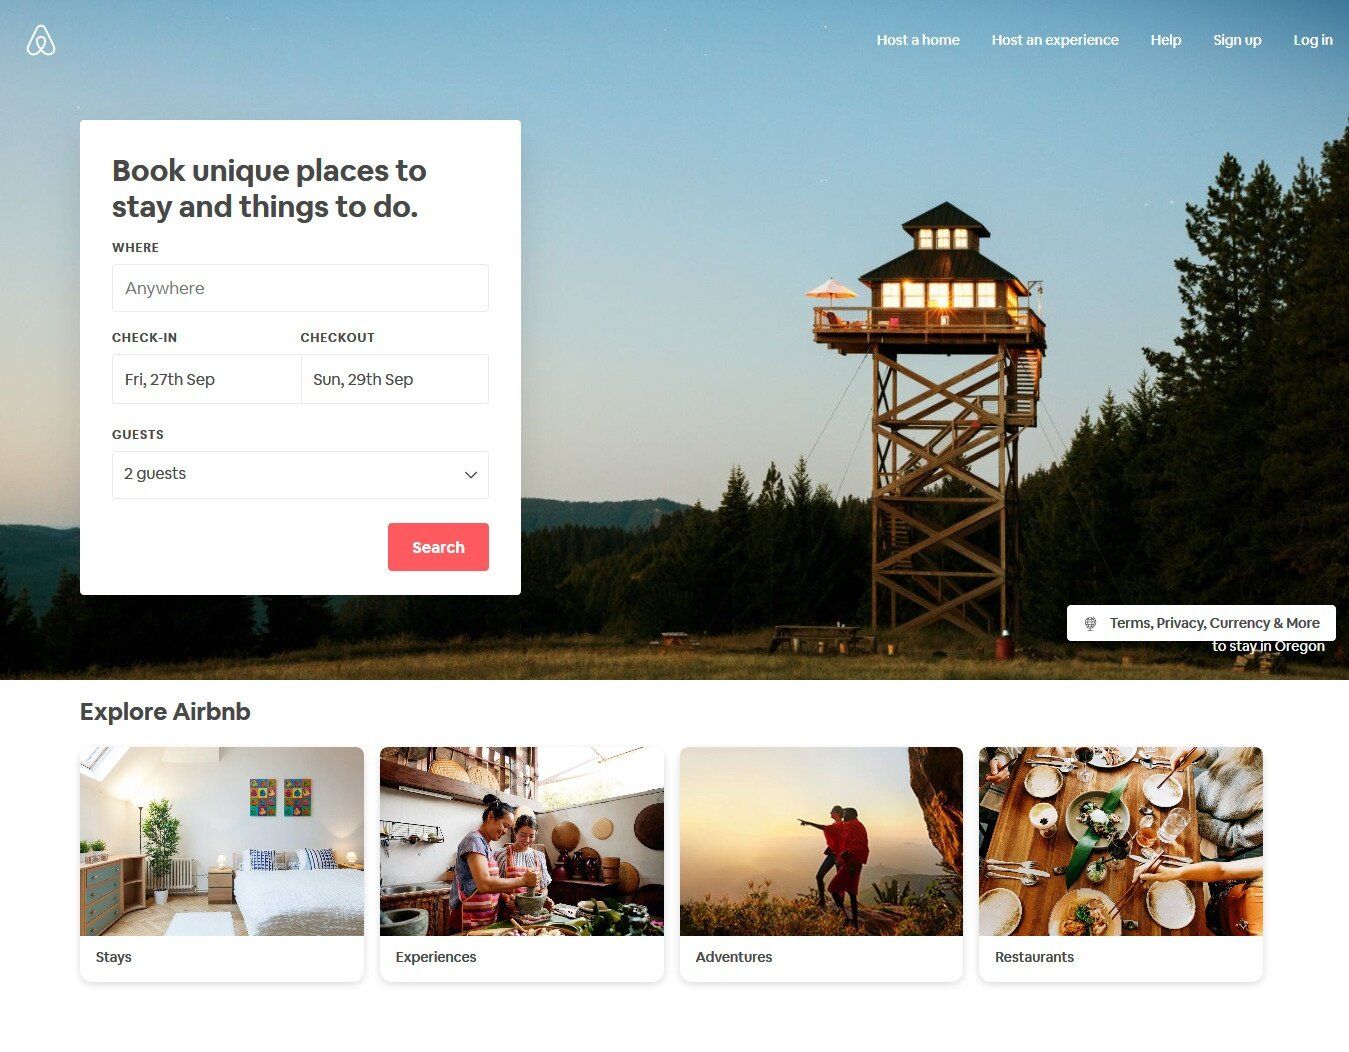 Airbnb as an example of multi vendor marketplace platforms for services (*shots from [Airbnb](https://www.airbnb.com.ua/){ rel="nofollow" target="_blank" .default-md}*)